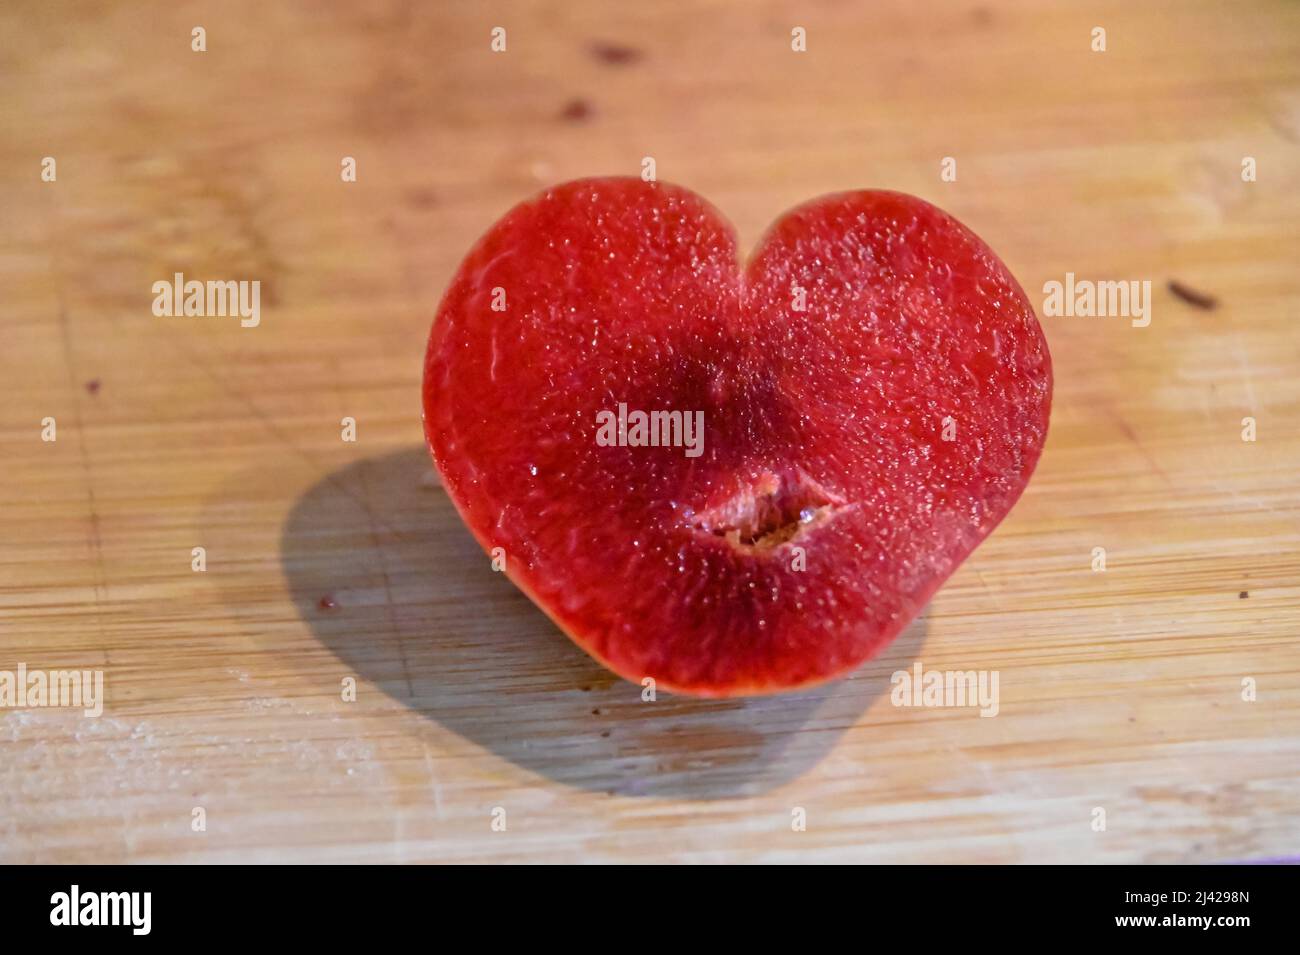 Half of a luscious plum, Prunus subg, naturally shaped in a heart with deep red flesh. Stock Photo